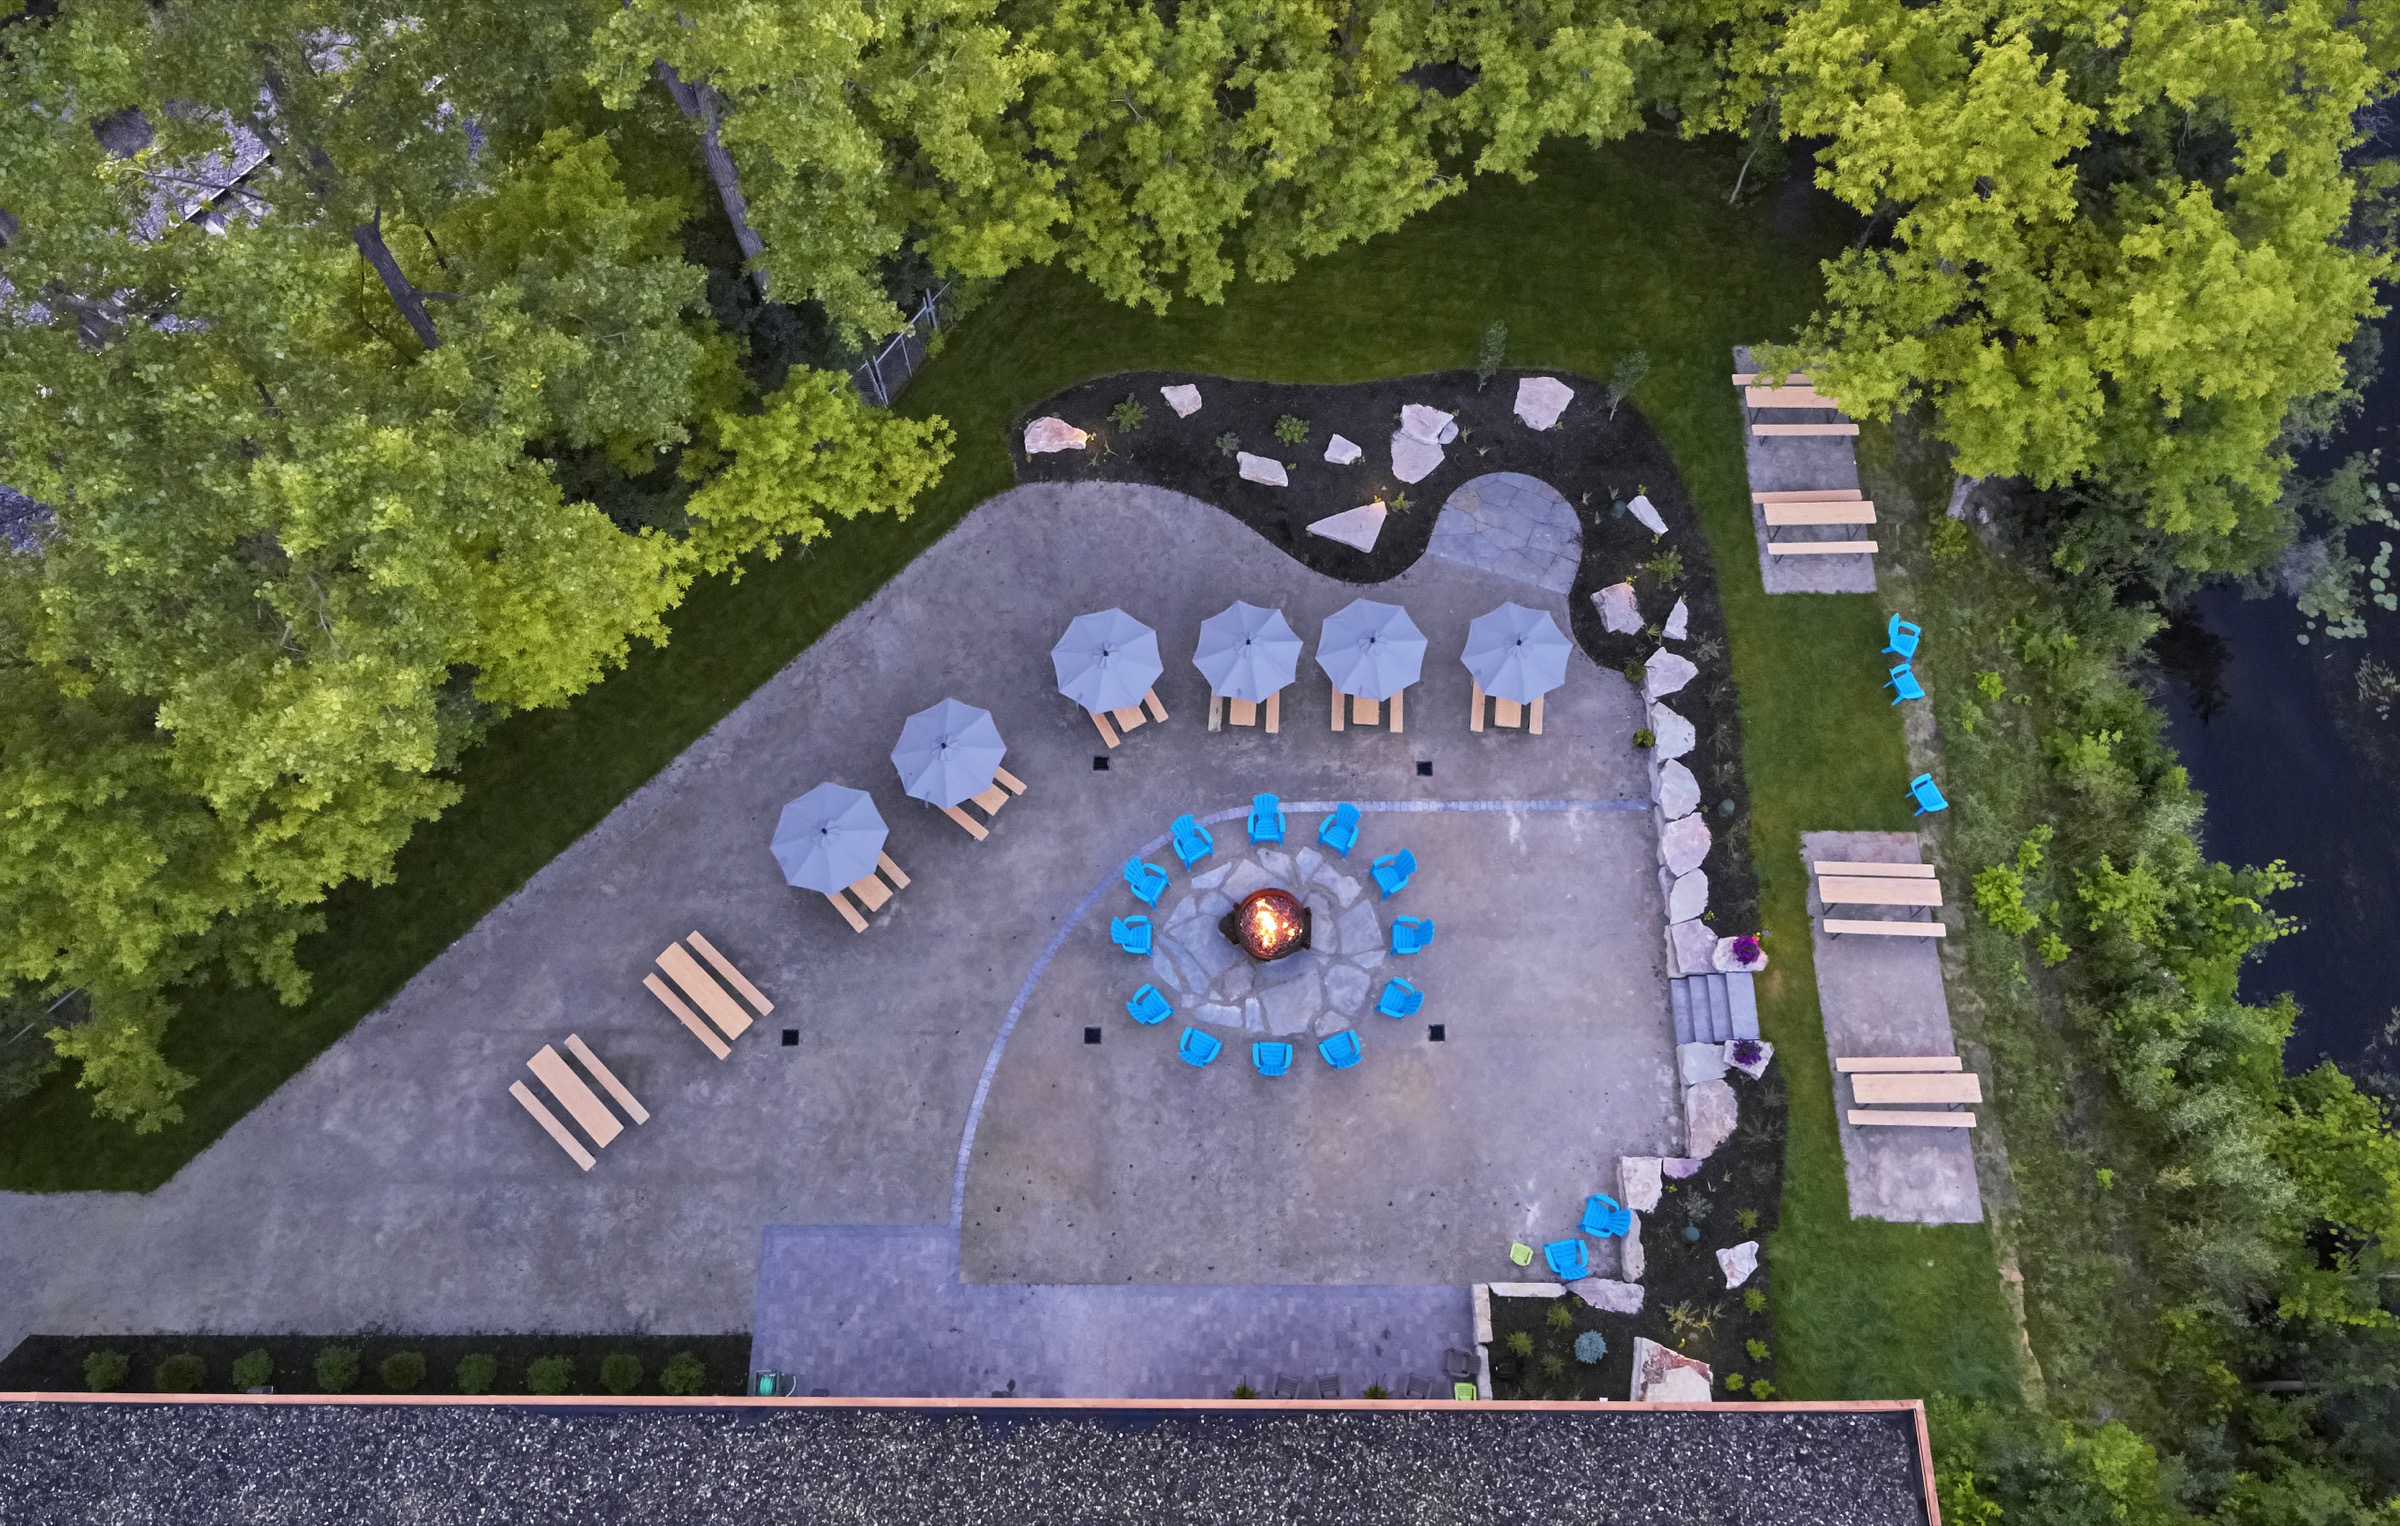 Aerial image showing the outdoor seating area at Utepils